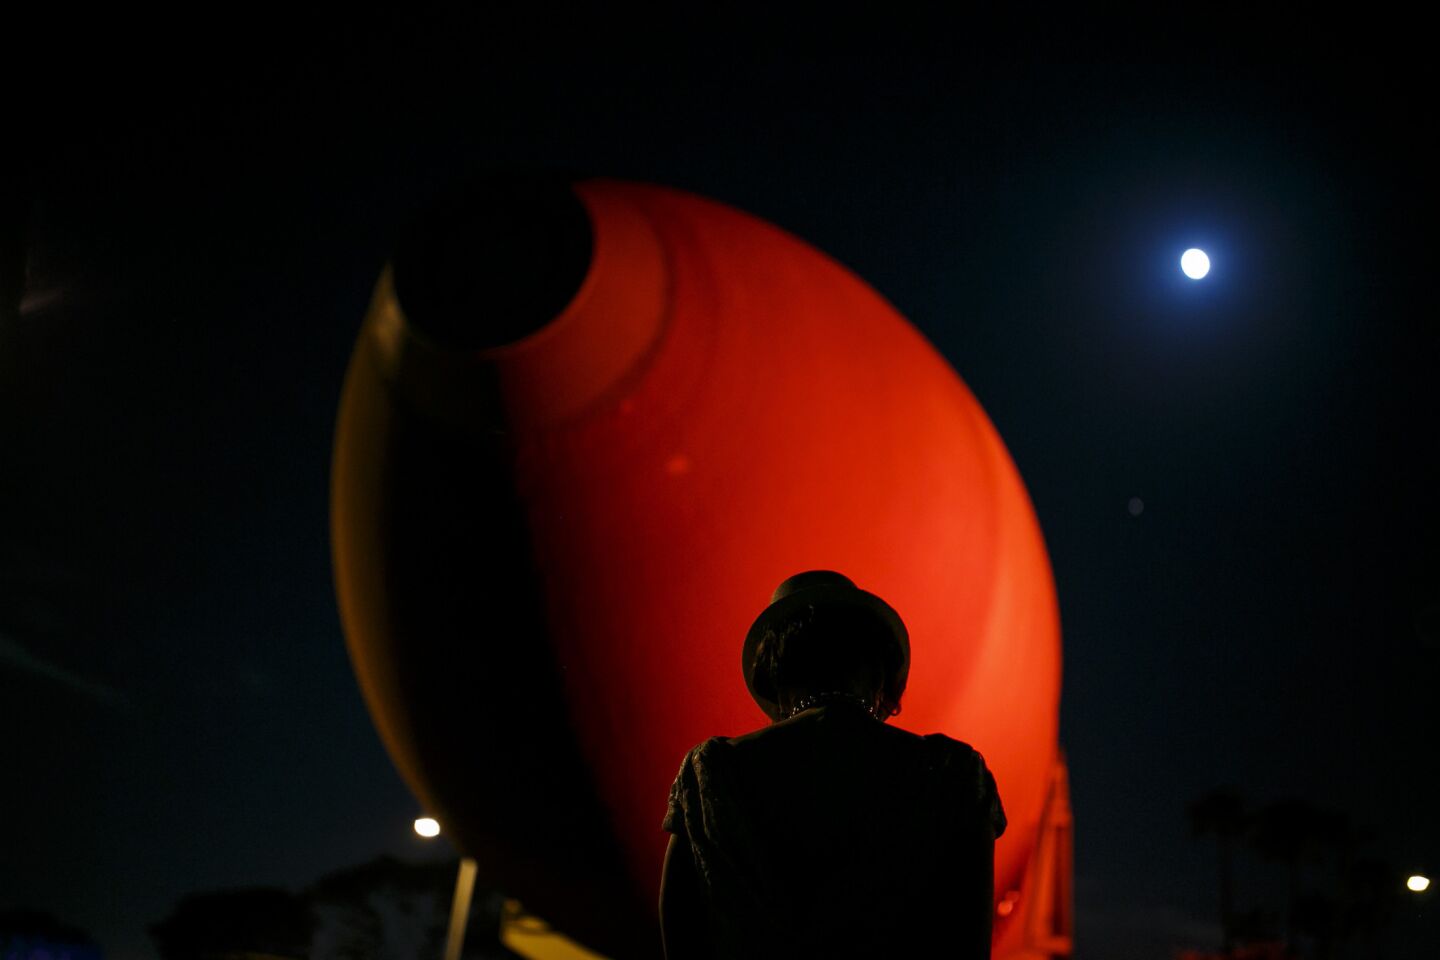 A woman takes a picture of the last shuttle fuel tank, ET-94, alongside an almost-full moon.